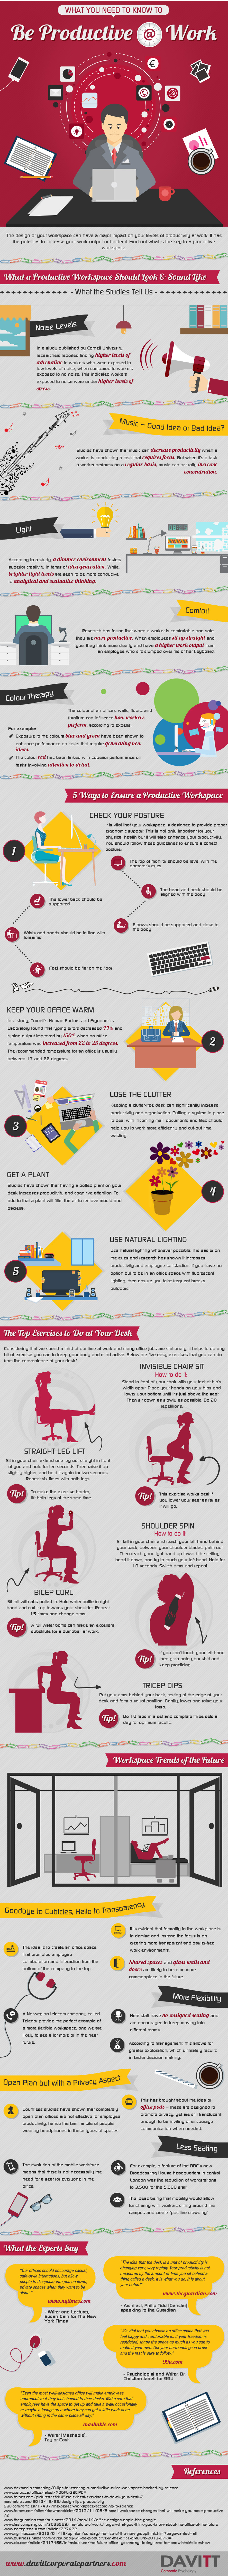 how-to-be-productive-at-work-infographic